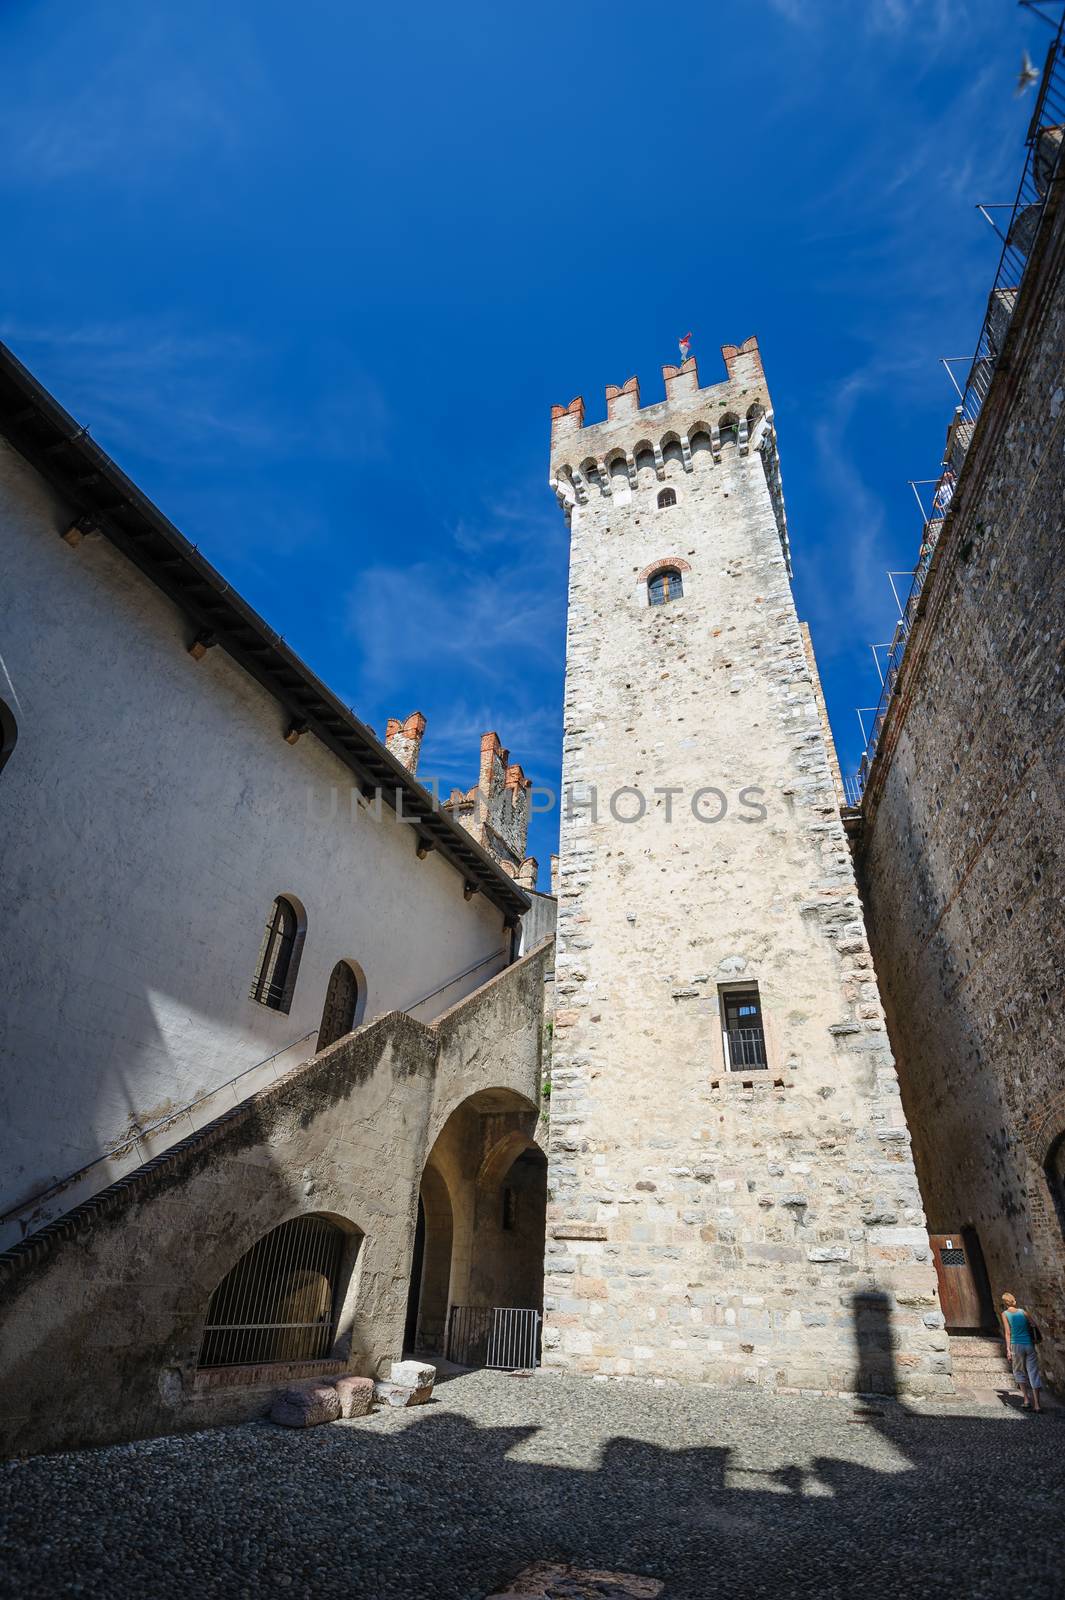 Ineror court of medieval castle Scaliger in old town Sirmione on lake Lago di Garda, Northern Italy by starush